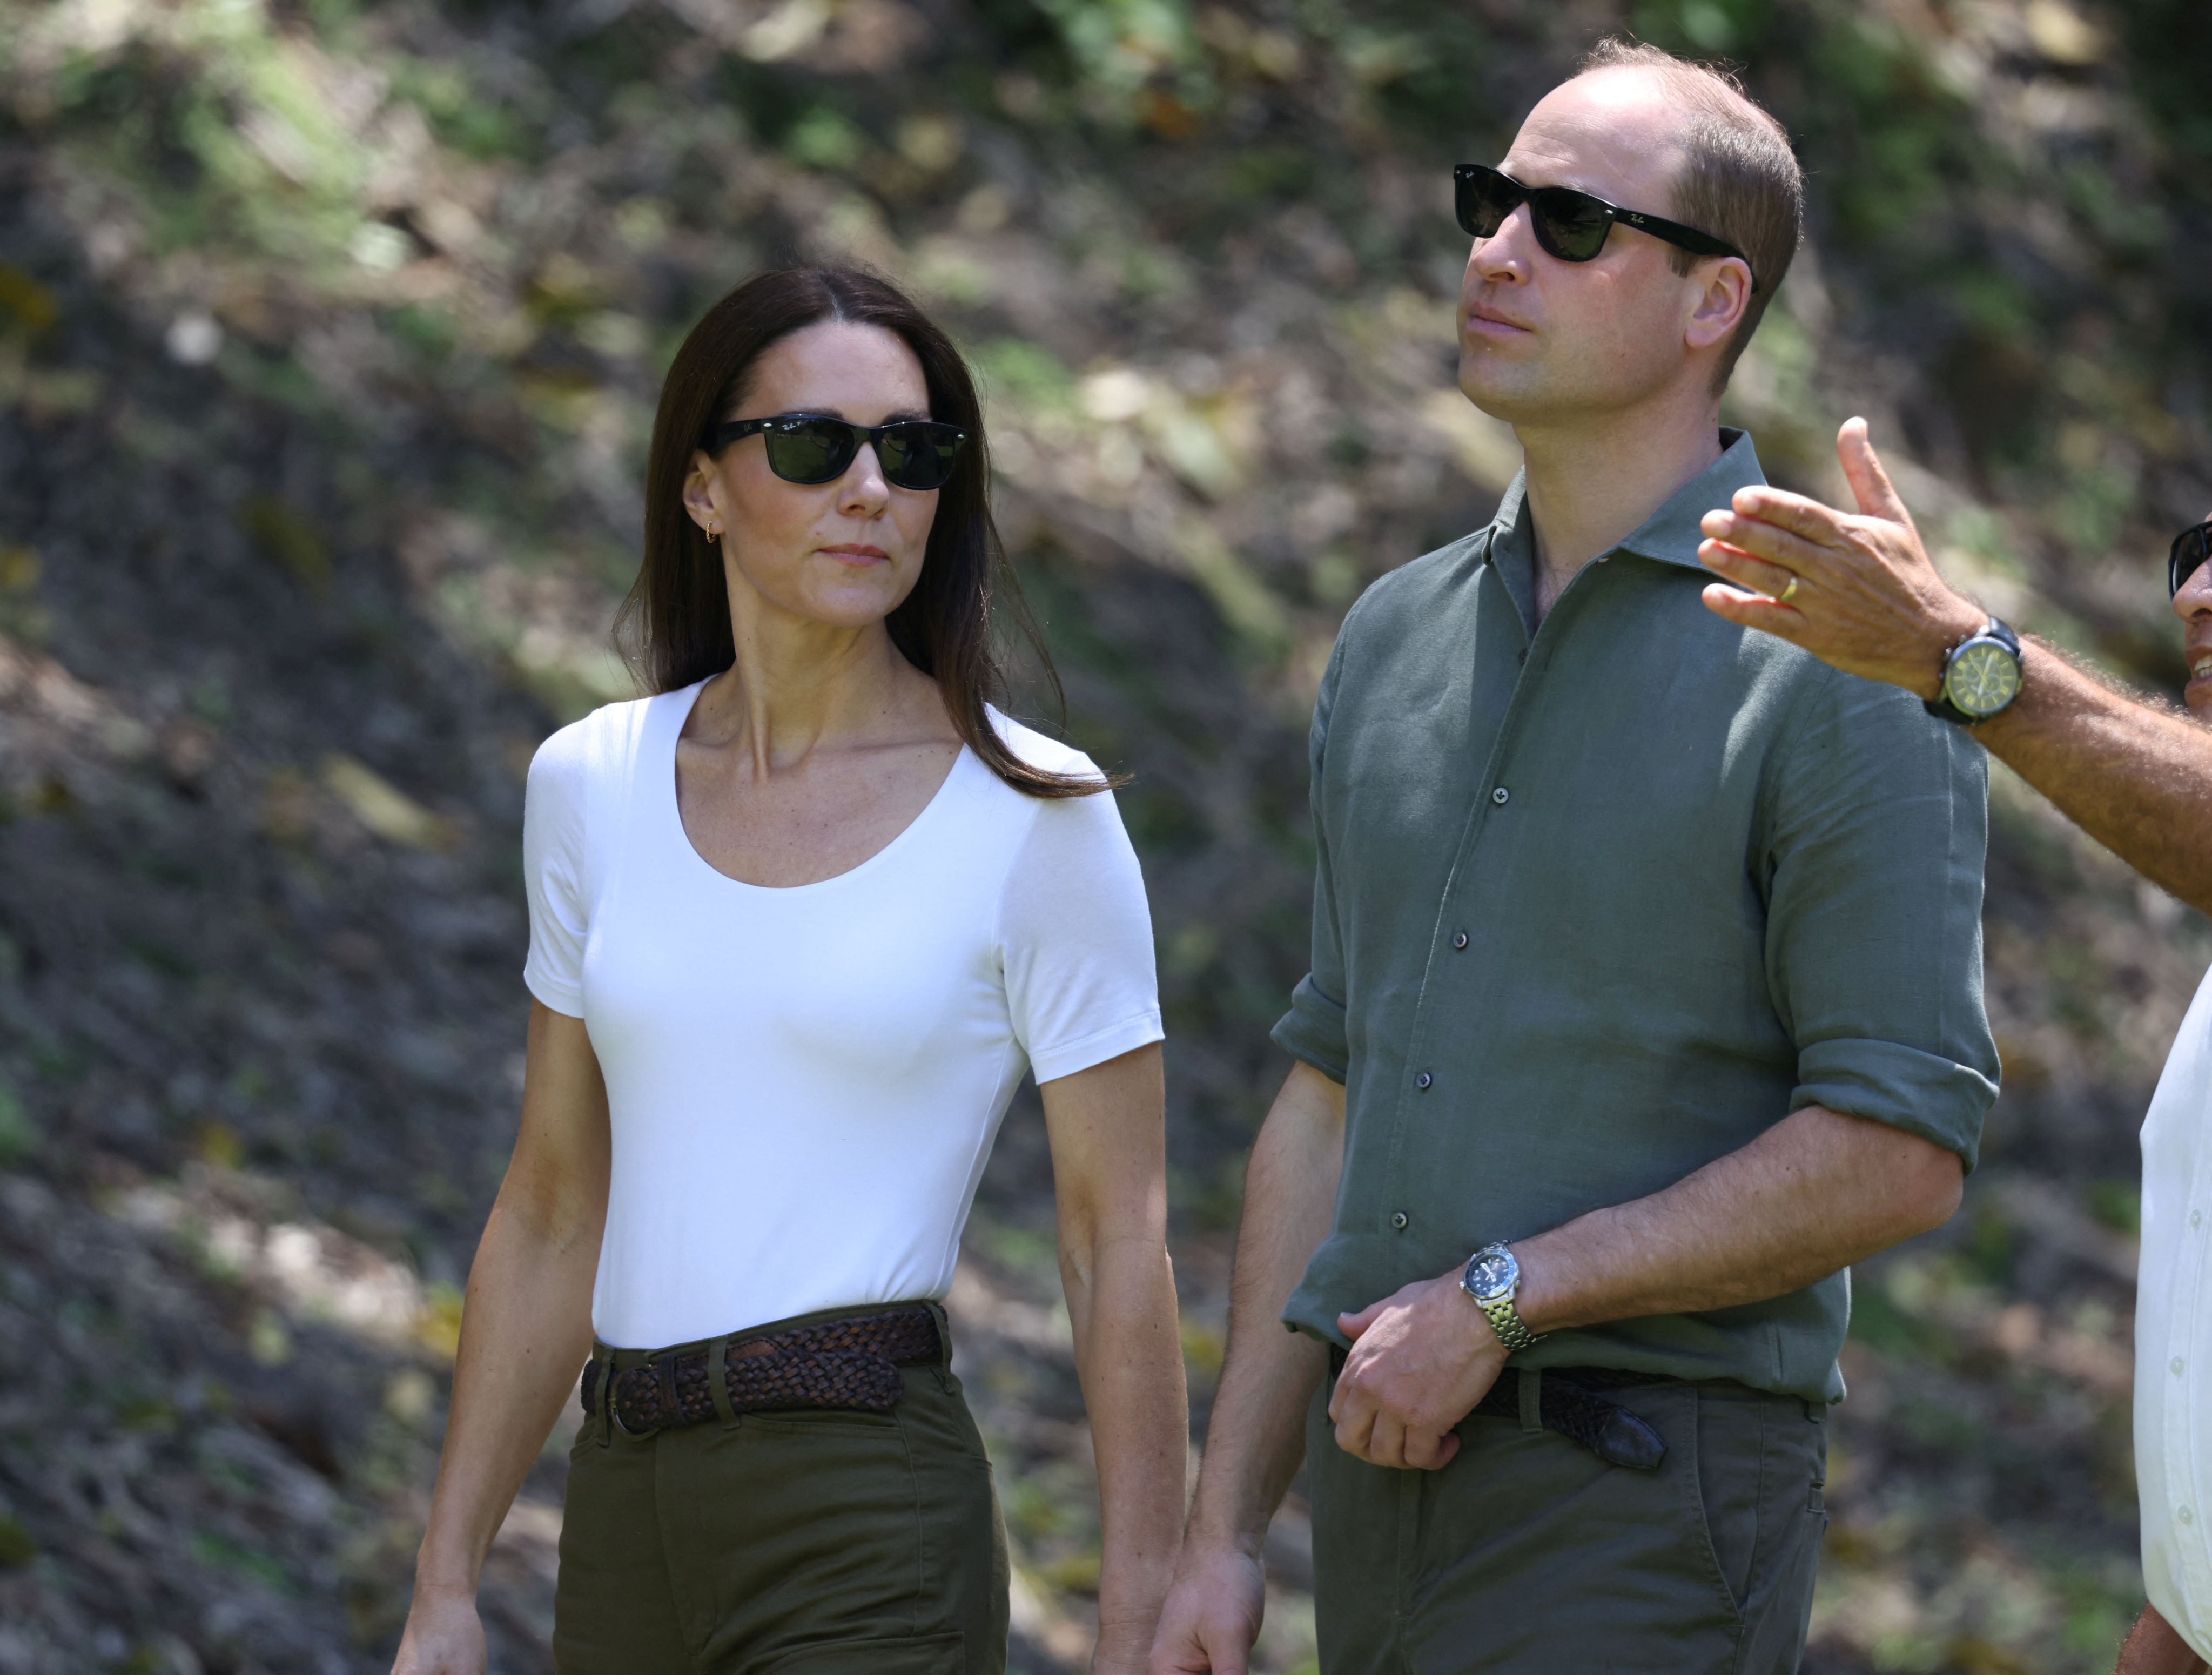 Britain’s Prince William and Catherine, Duchess of Cambridge visit Caracol, an ancient Mayan archaeological site as part of their tour in Belize on March 21. Photo: Reuters